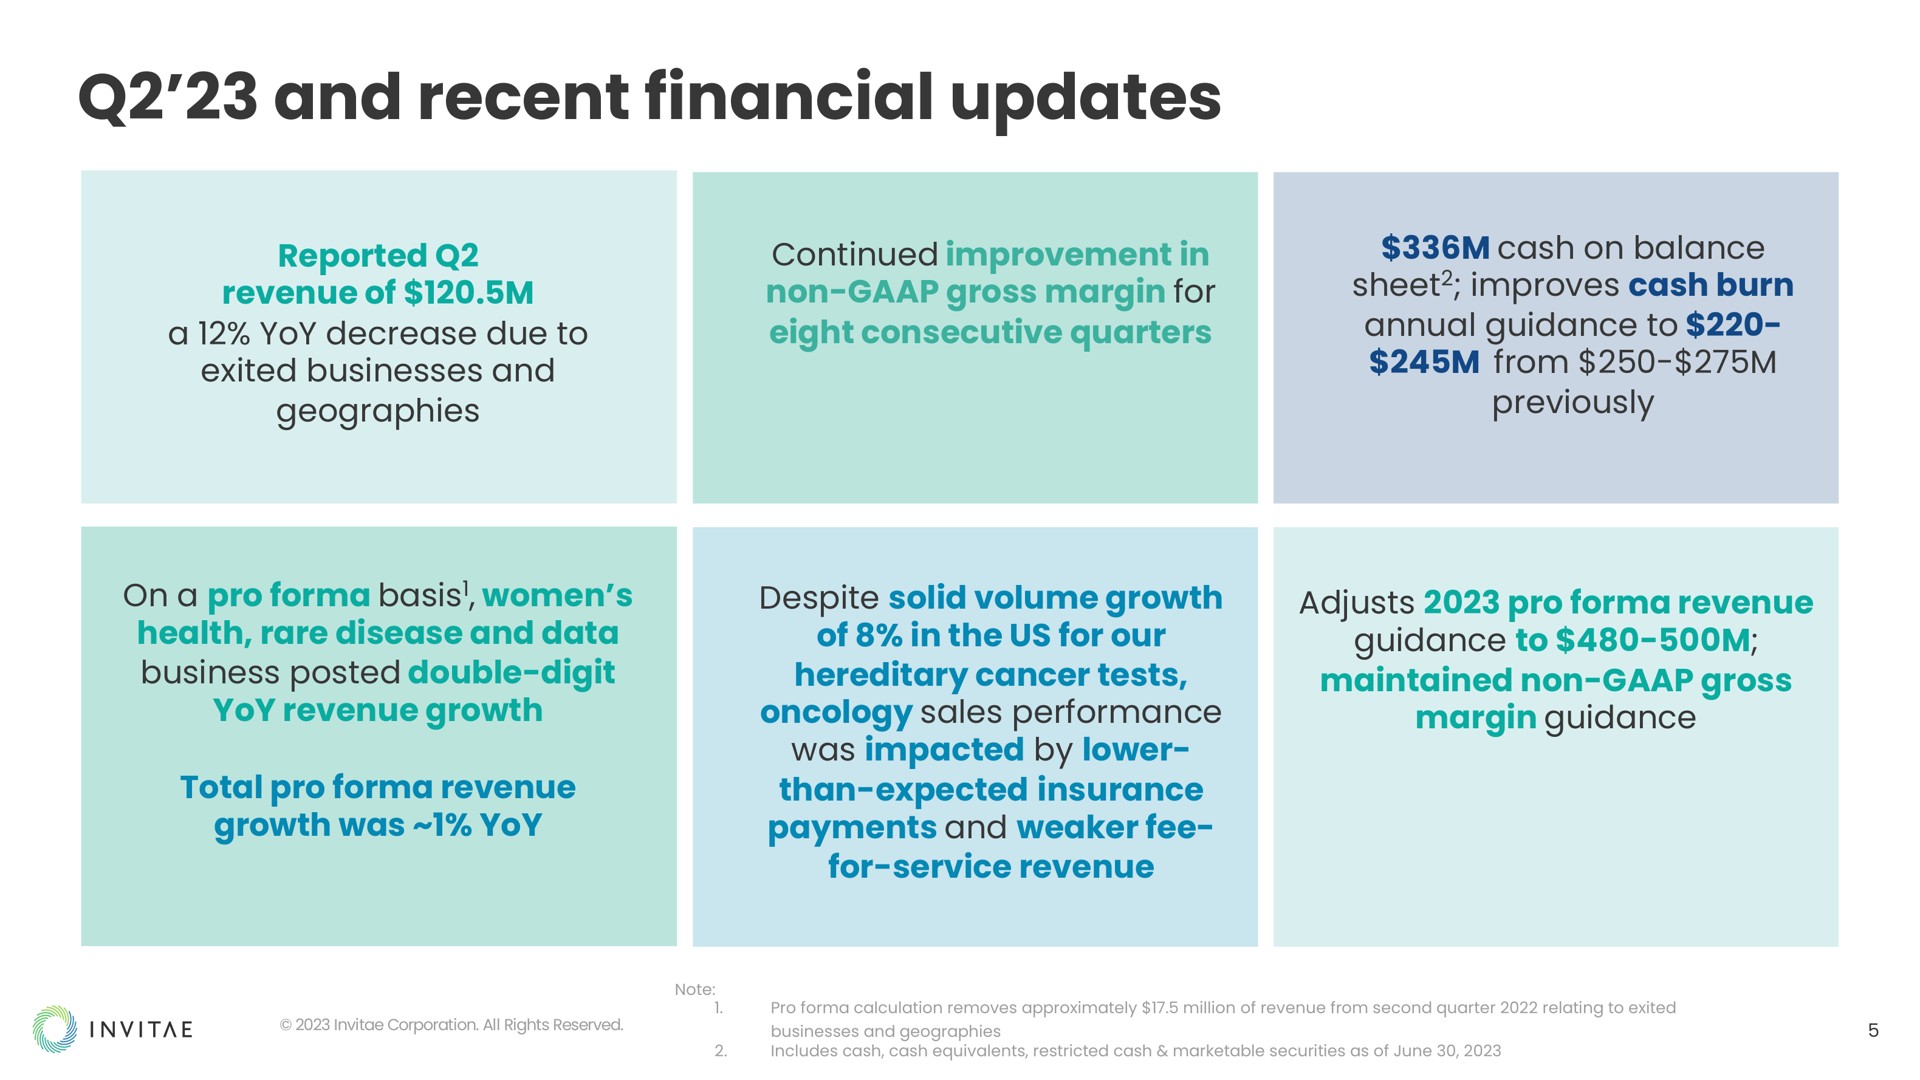 and recent financial updates | Invitae